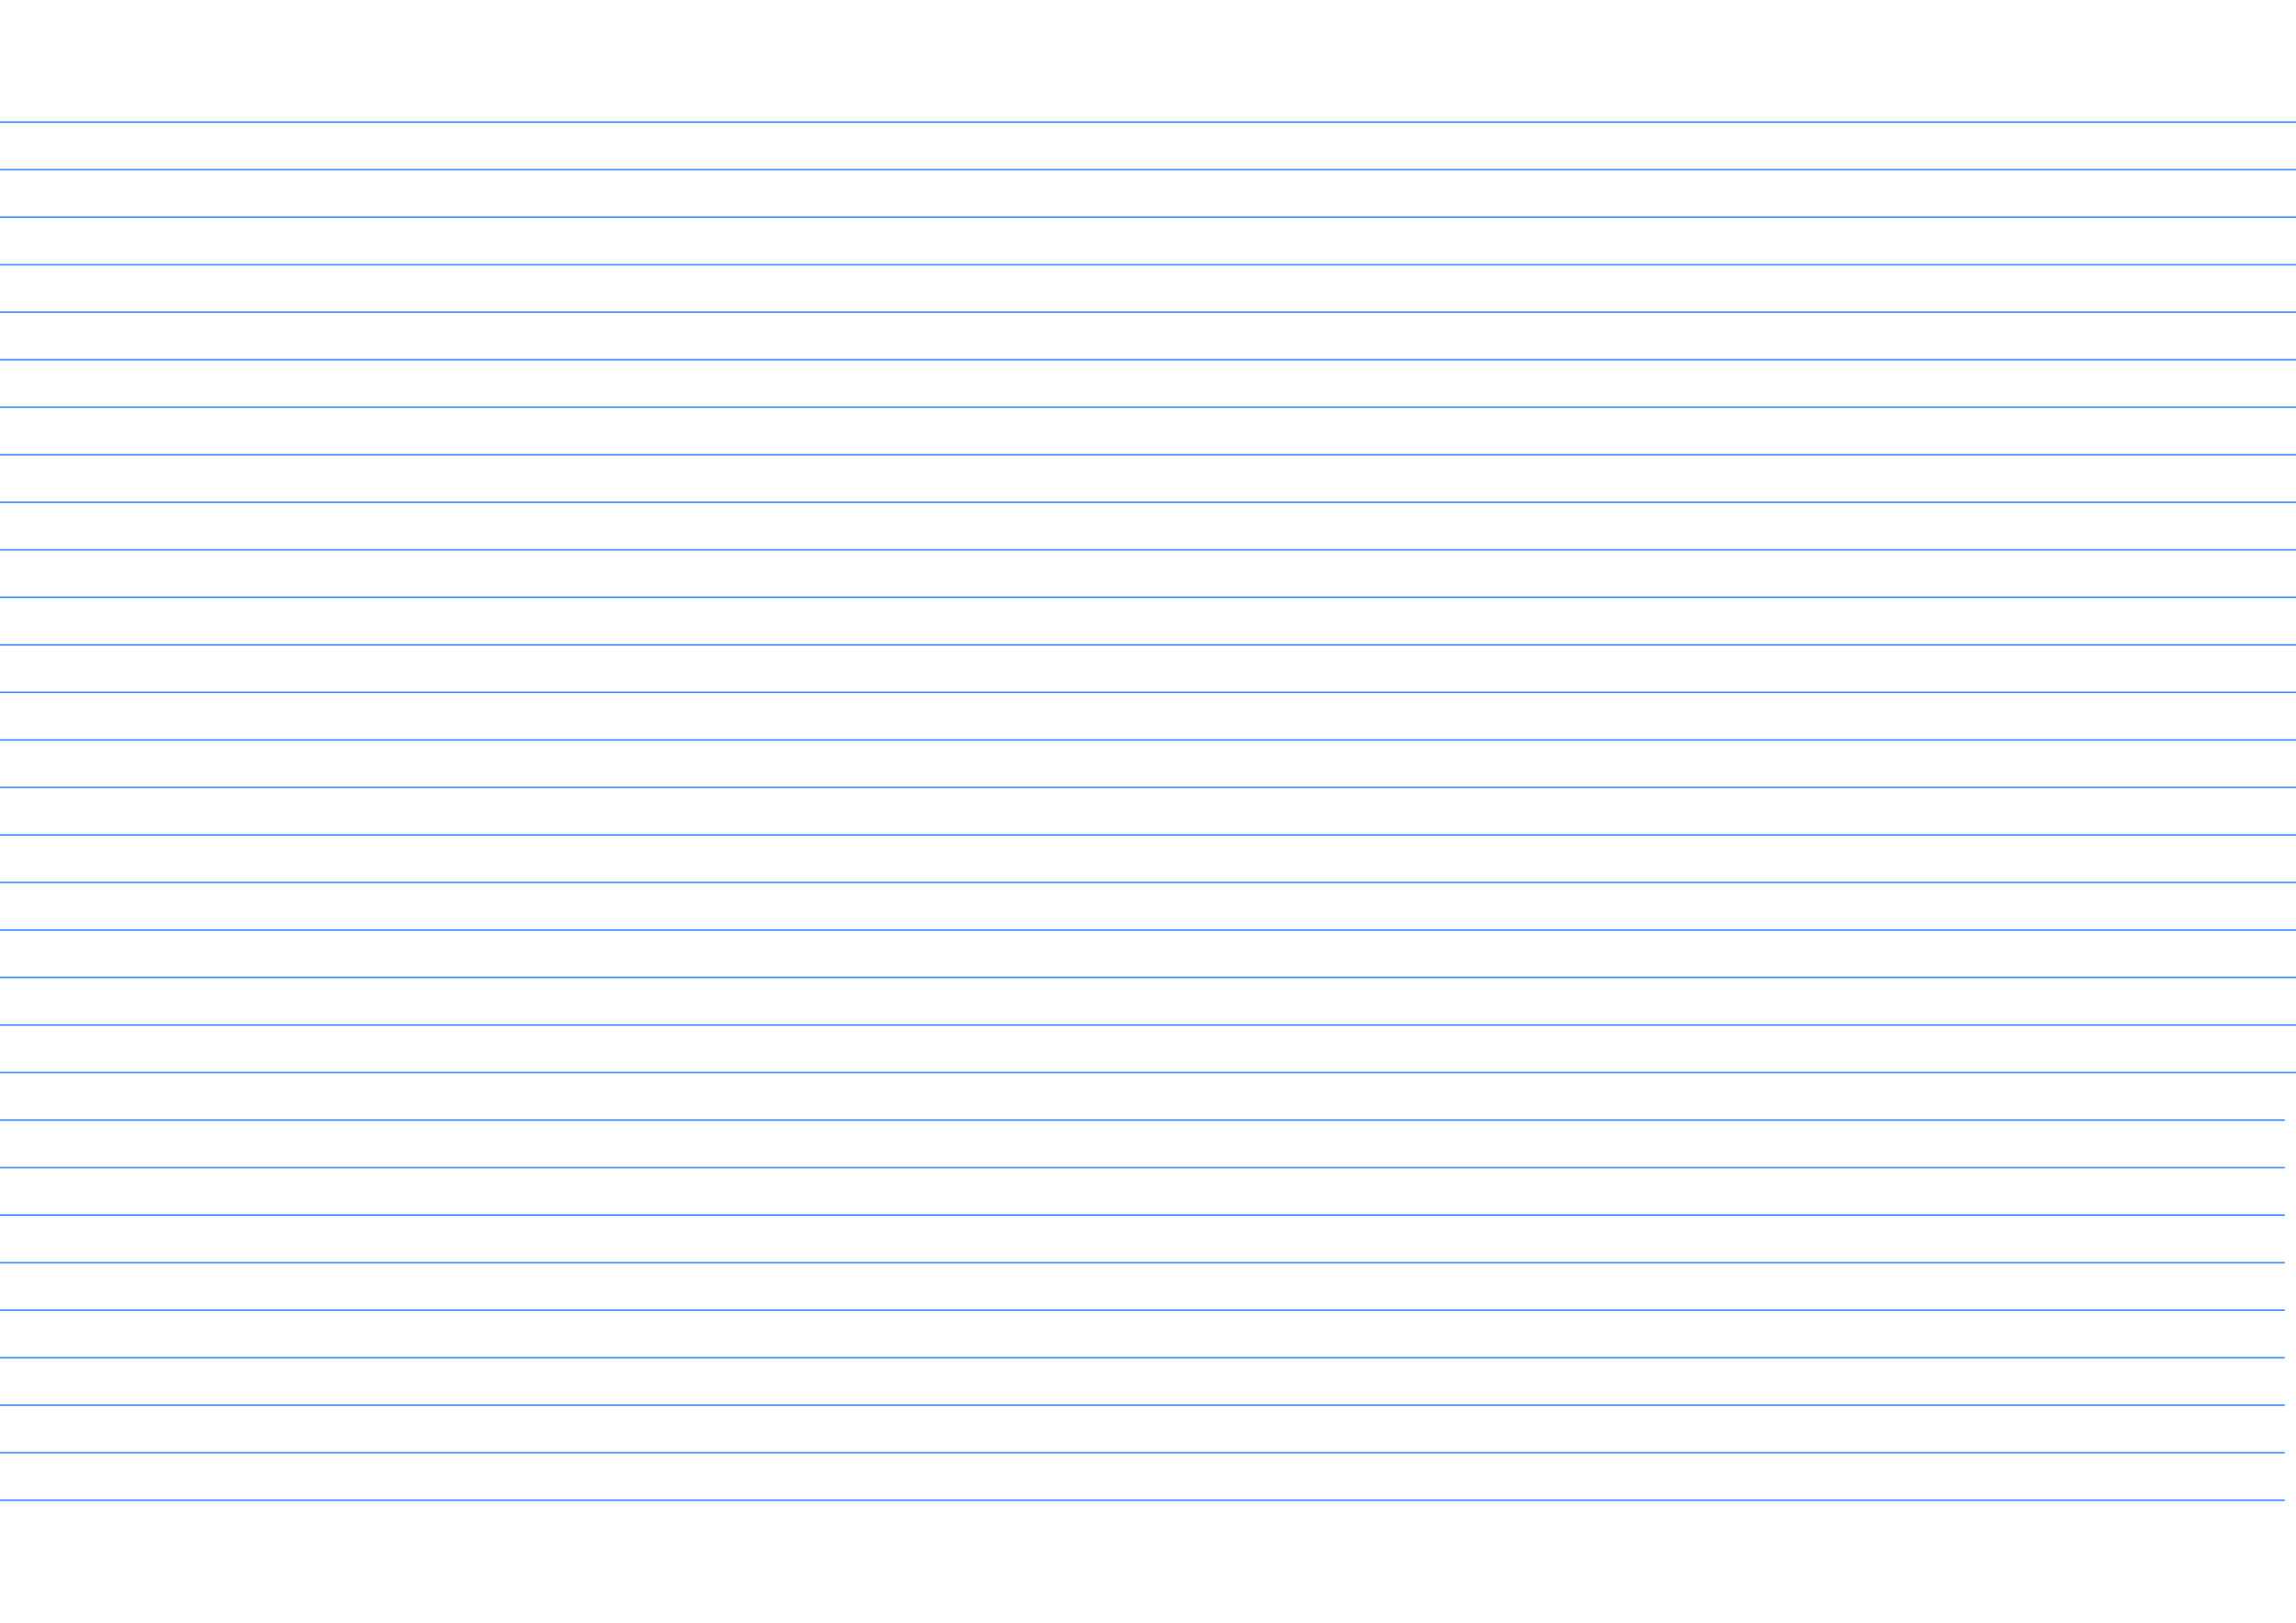 Notebook Paper Template For Word - Calep.midnightpig.co Inside Ruled Paper Template Word